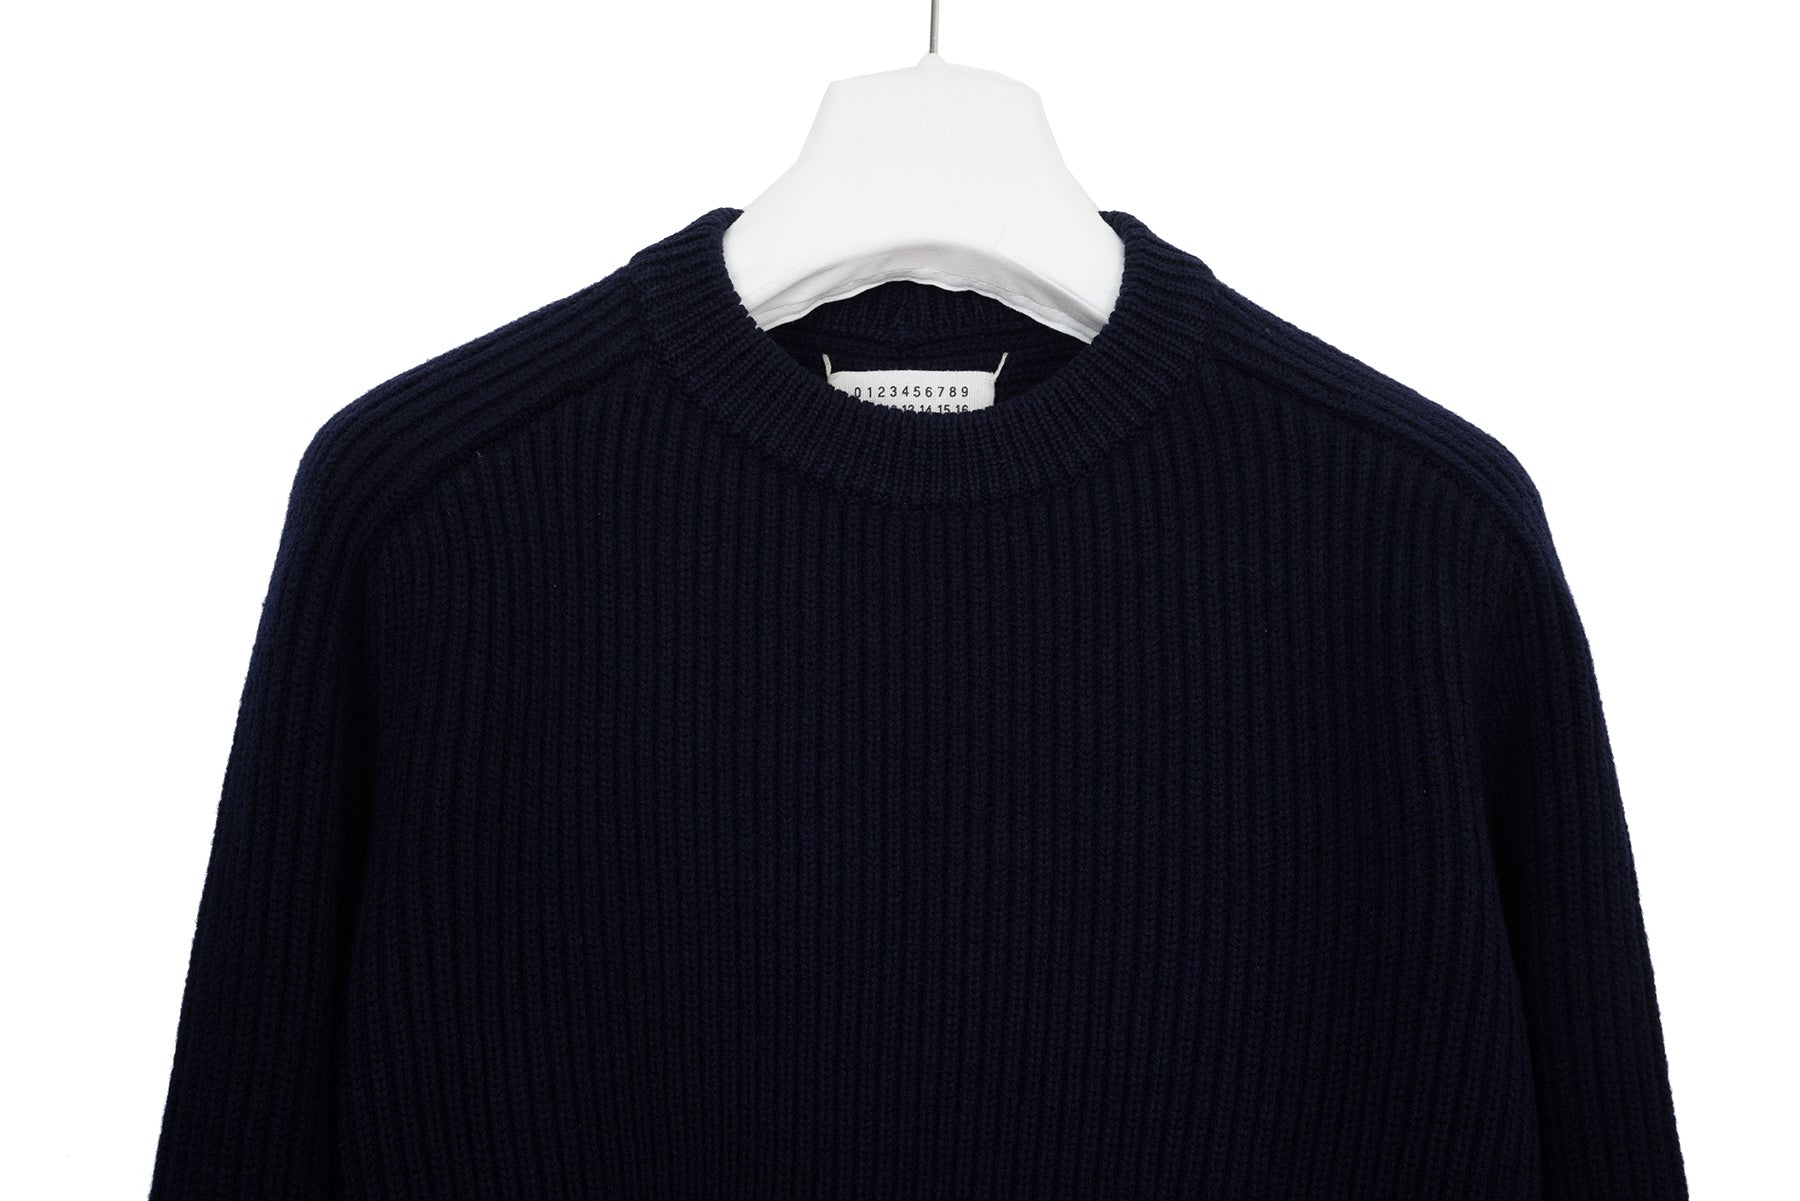 2000 A/W MILITARY NAVY CREWNECK WITH HAMMER SLEEVES BY MISS DEANNA